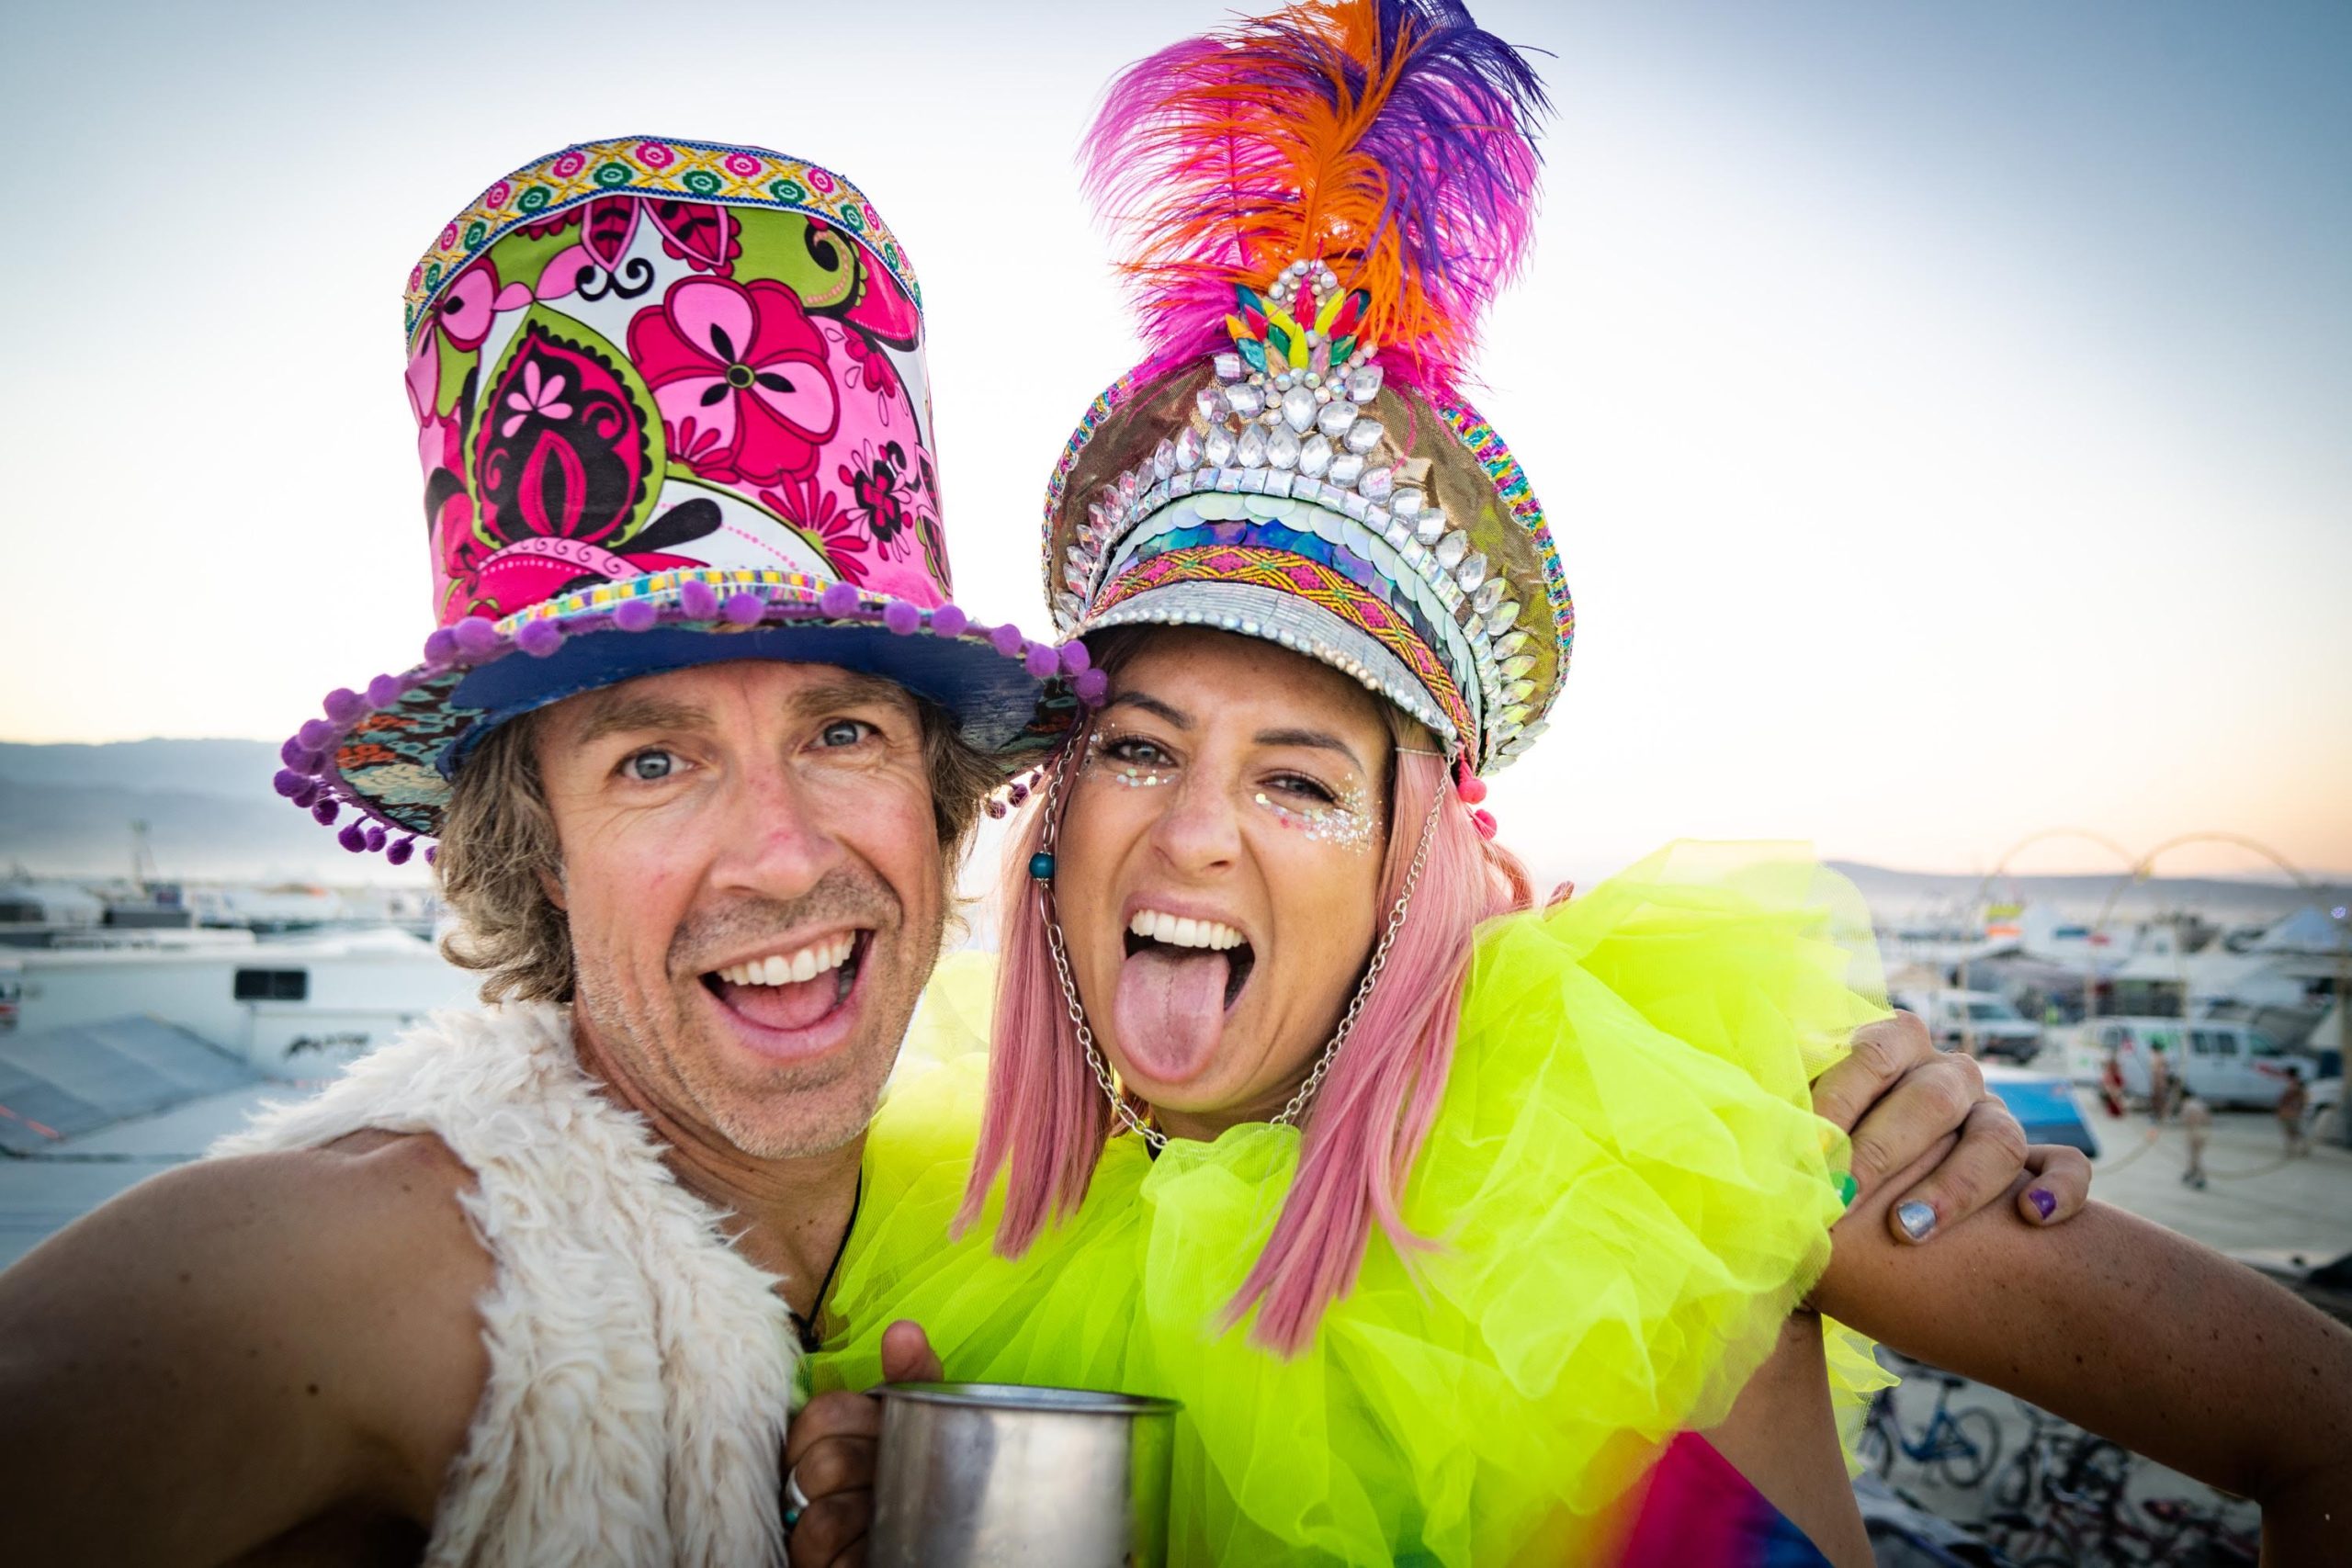 Euphoric Threads Ultimate Guide to Attending Burning Man Festival